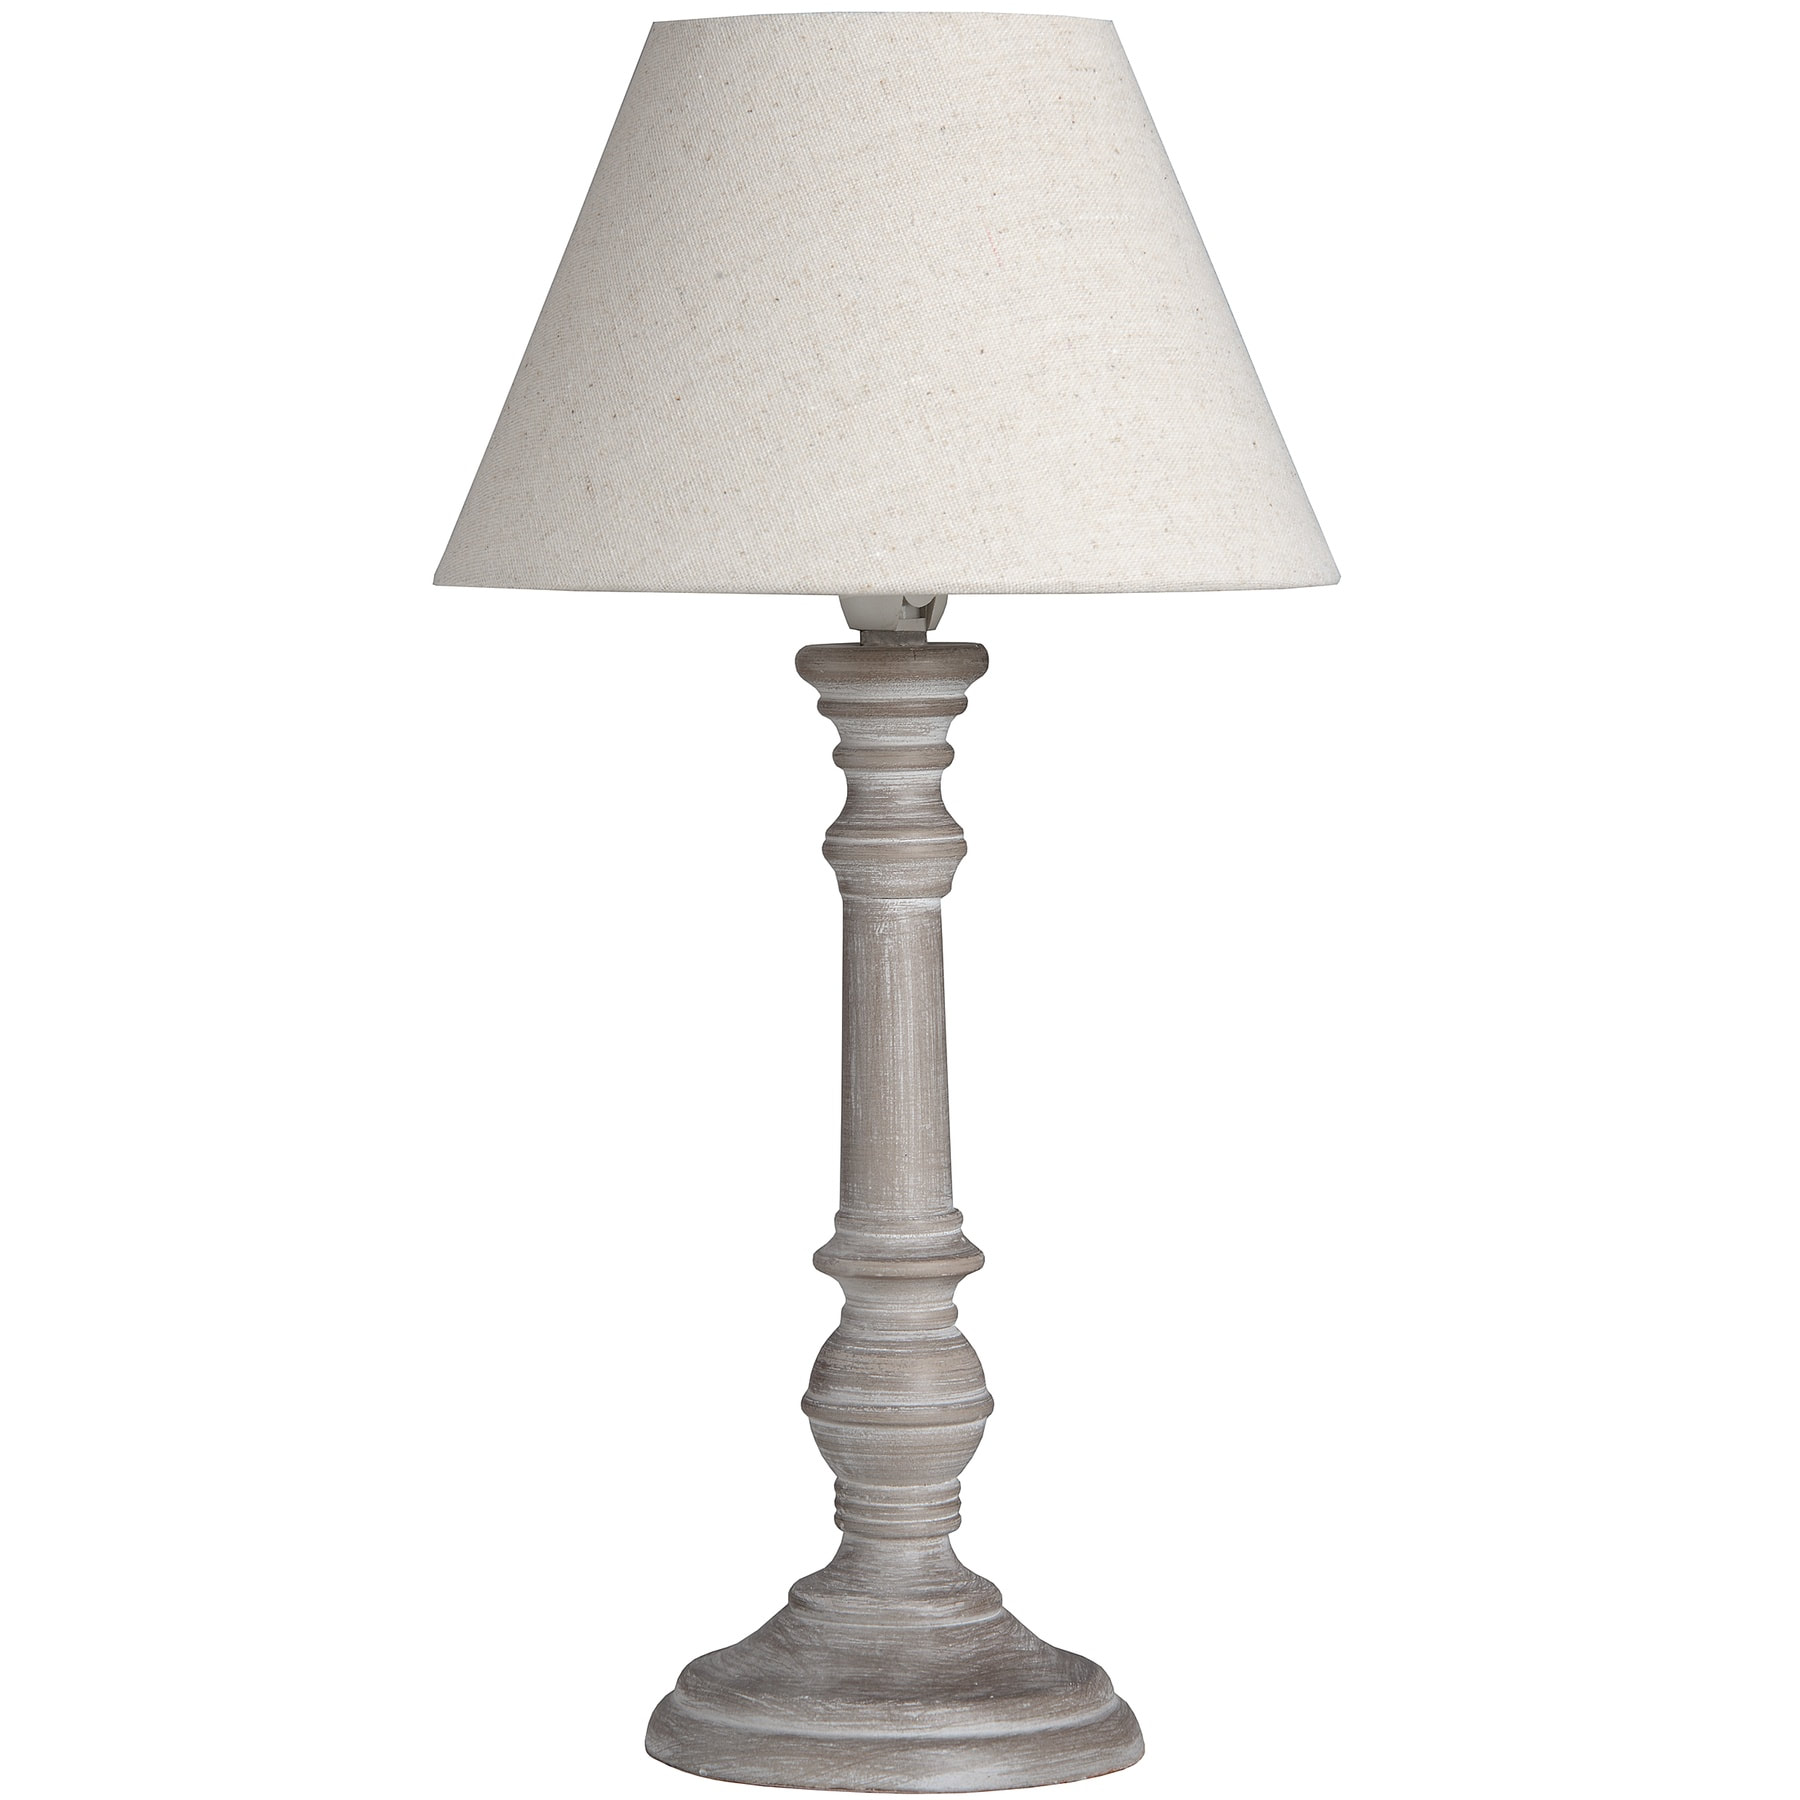 Wooden Fluted Column Table Lamps, Antique French Provincial Table Lamps